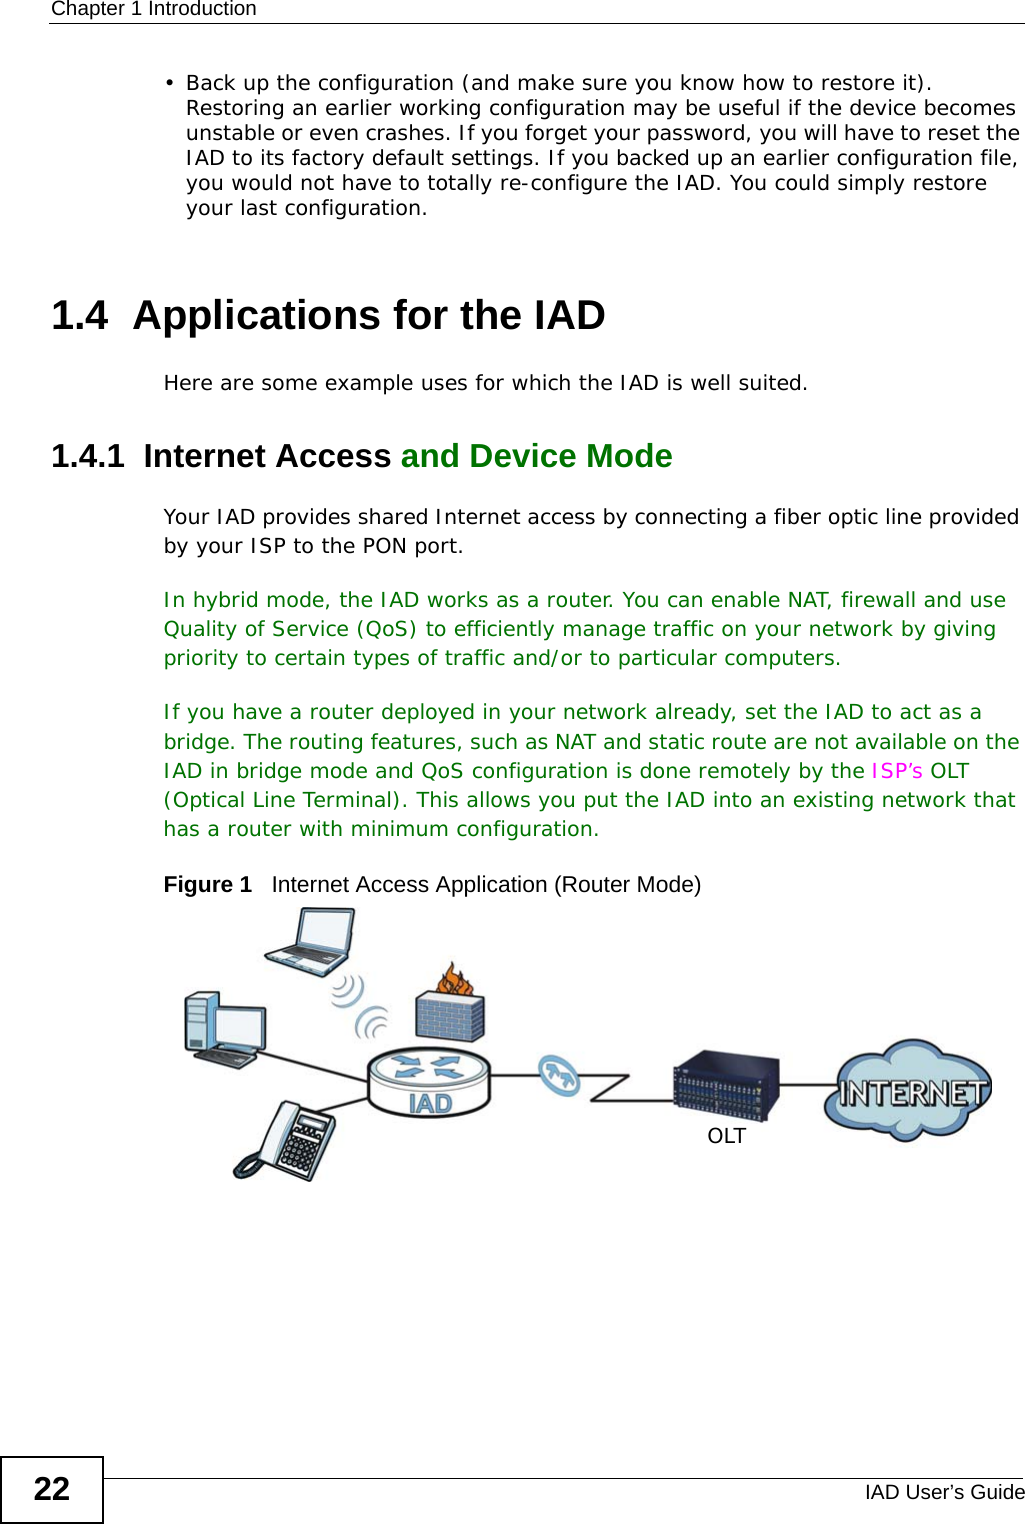 Chapter 1 IntroductionIAD User’s Guide22• Back up the configuration (and make sure you know how to restore it). Restoring an earlier working configuration may be useful if the device becomes unstable or even crashes. If you forget your password, you will have to reset the IAD to its factory default settings. If you backed up an earlier configuration file, you would not have to totally re-configure the IAD. You could simply restore your last configuration.1.4  Applications for the IADHere are some example uses for which the IAD is well suited.1.4.1  Internet Access and Device ModeYour IAD provides shared Internet access by connecting a fiber optic line provided by your ISP to the PON port. In hybrid mode, the IAD works as a router. You can enable NAT, firewall and use Quality of Service (QoS) to efficiently manage traffic on your network by giving priority to certain types of traffic and/or to particular computers. If you have a router deployed in your network already, set the IAD to act as a bridge. The routing features, such as NAT and static route are not available on the IAD in bridge mode and QoS configuration is done remotely by the ISP’s OLT (Optical Line Terminal). This allows you put the IAD into an existing network that has a router with minimum configuration.Figure 1   Internet Access Application (Router Mode) OLT